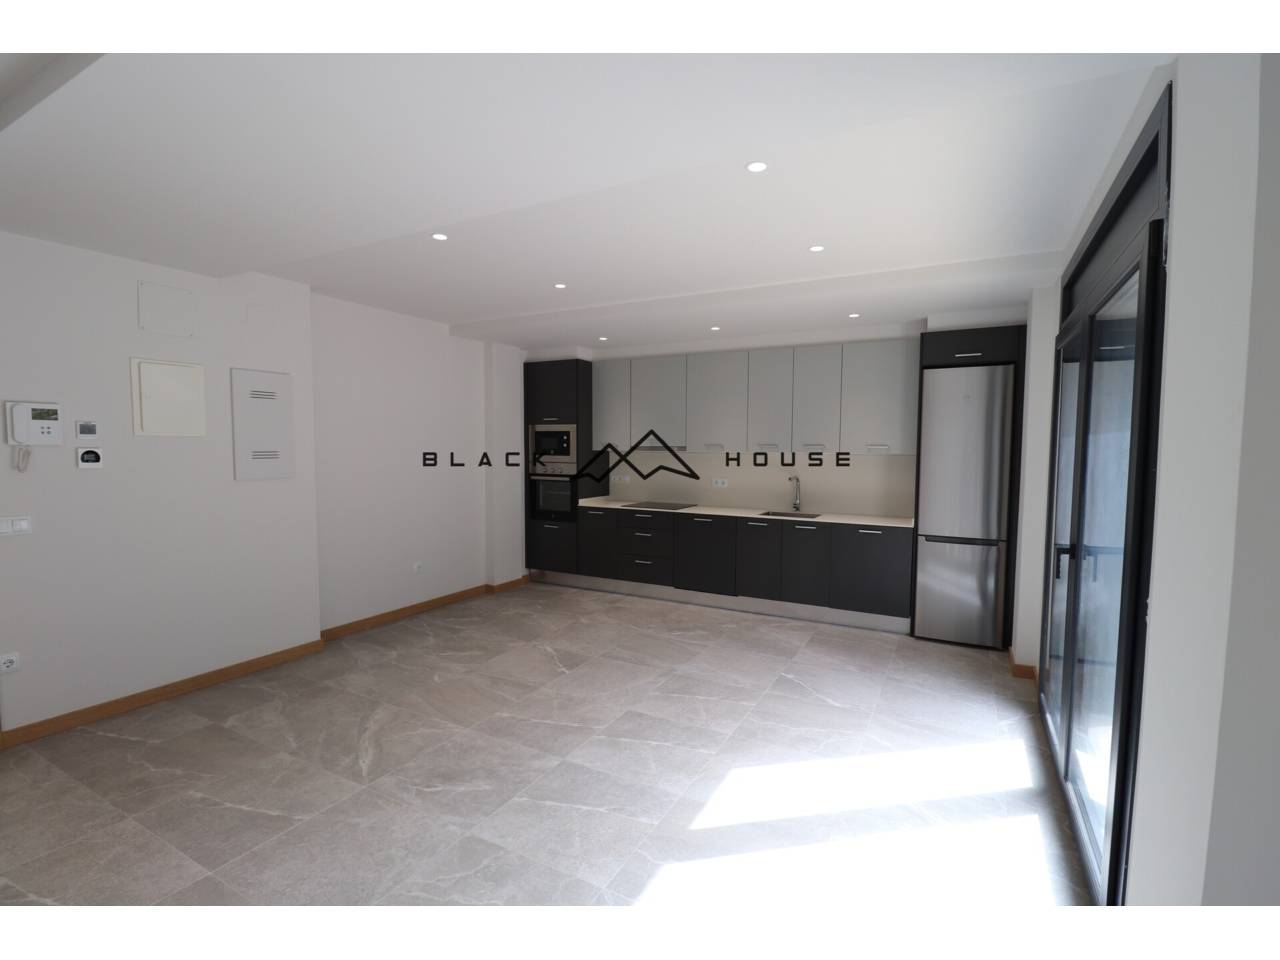 Newly built rental apartment located in the center of Andorra la Vella.